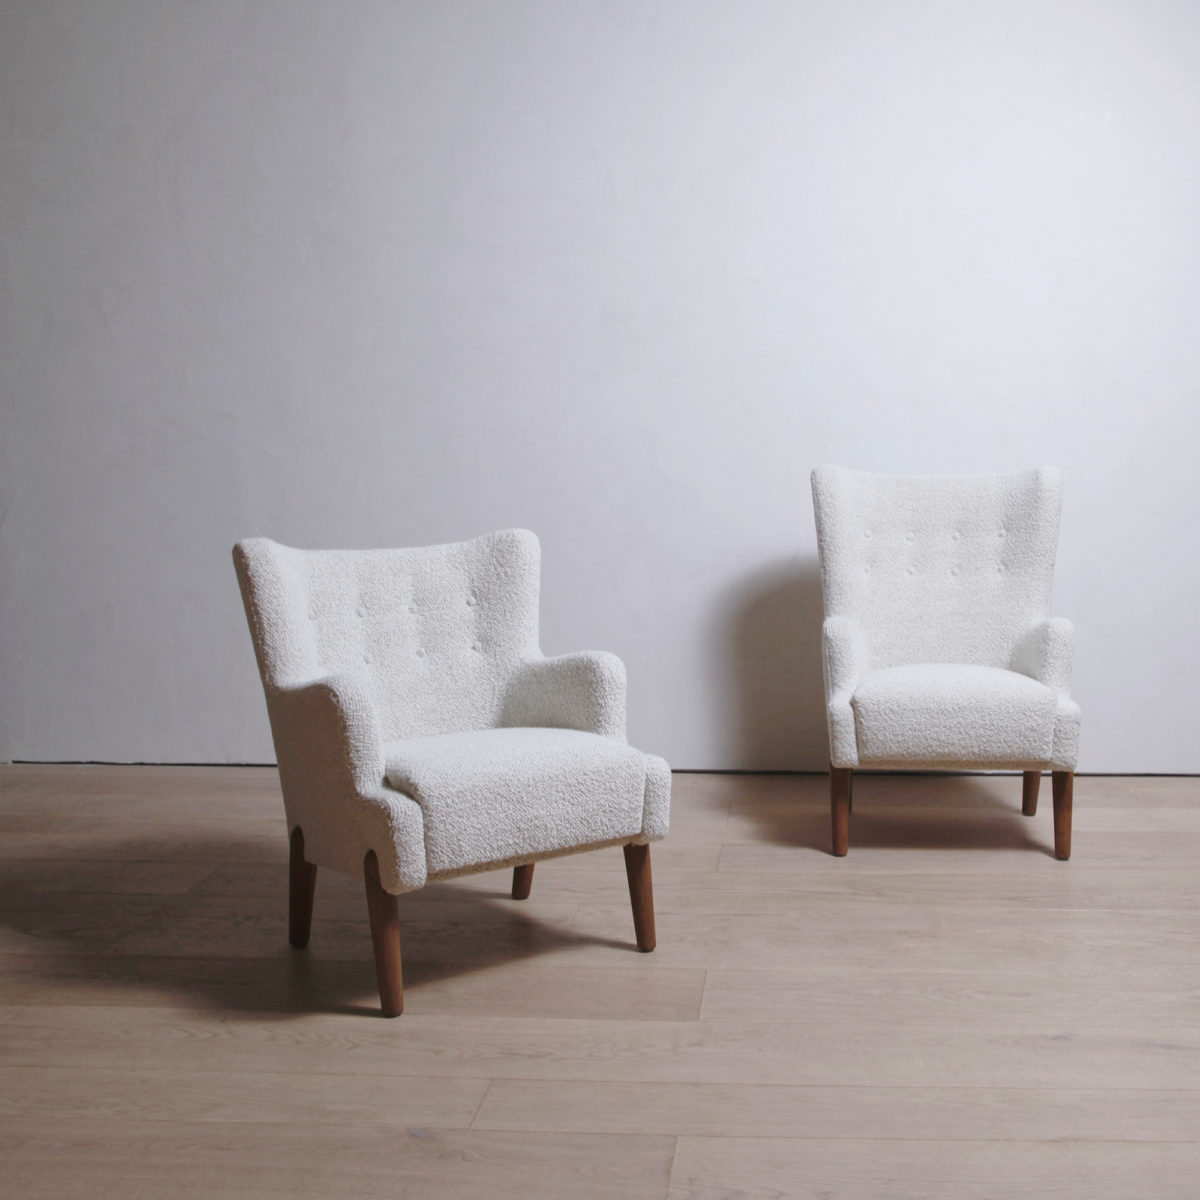 Pair of Arm Chairs by Eva and Nils Koppel - Lawton Mull